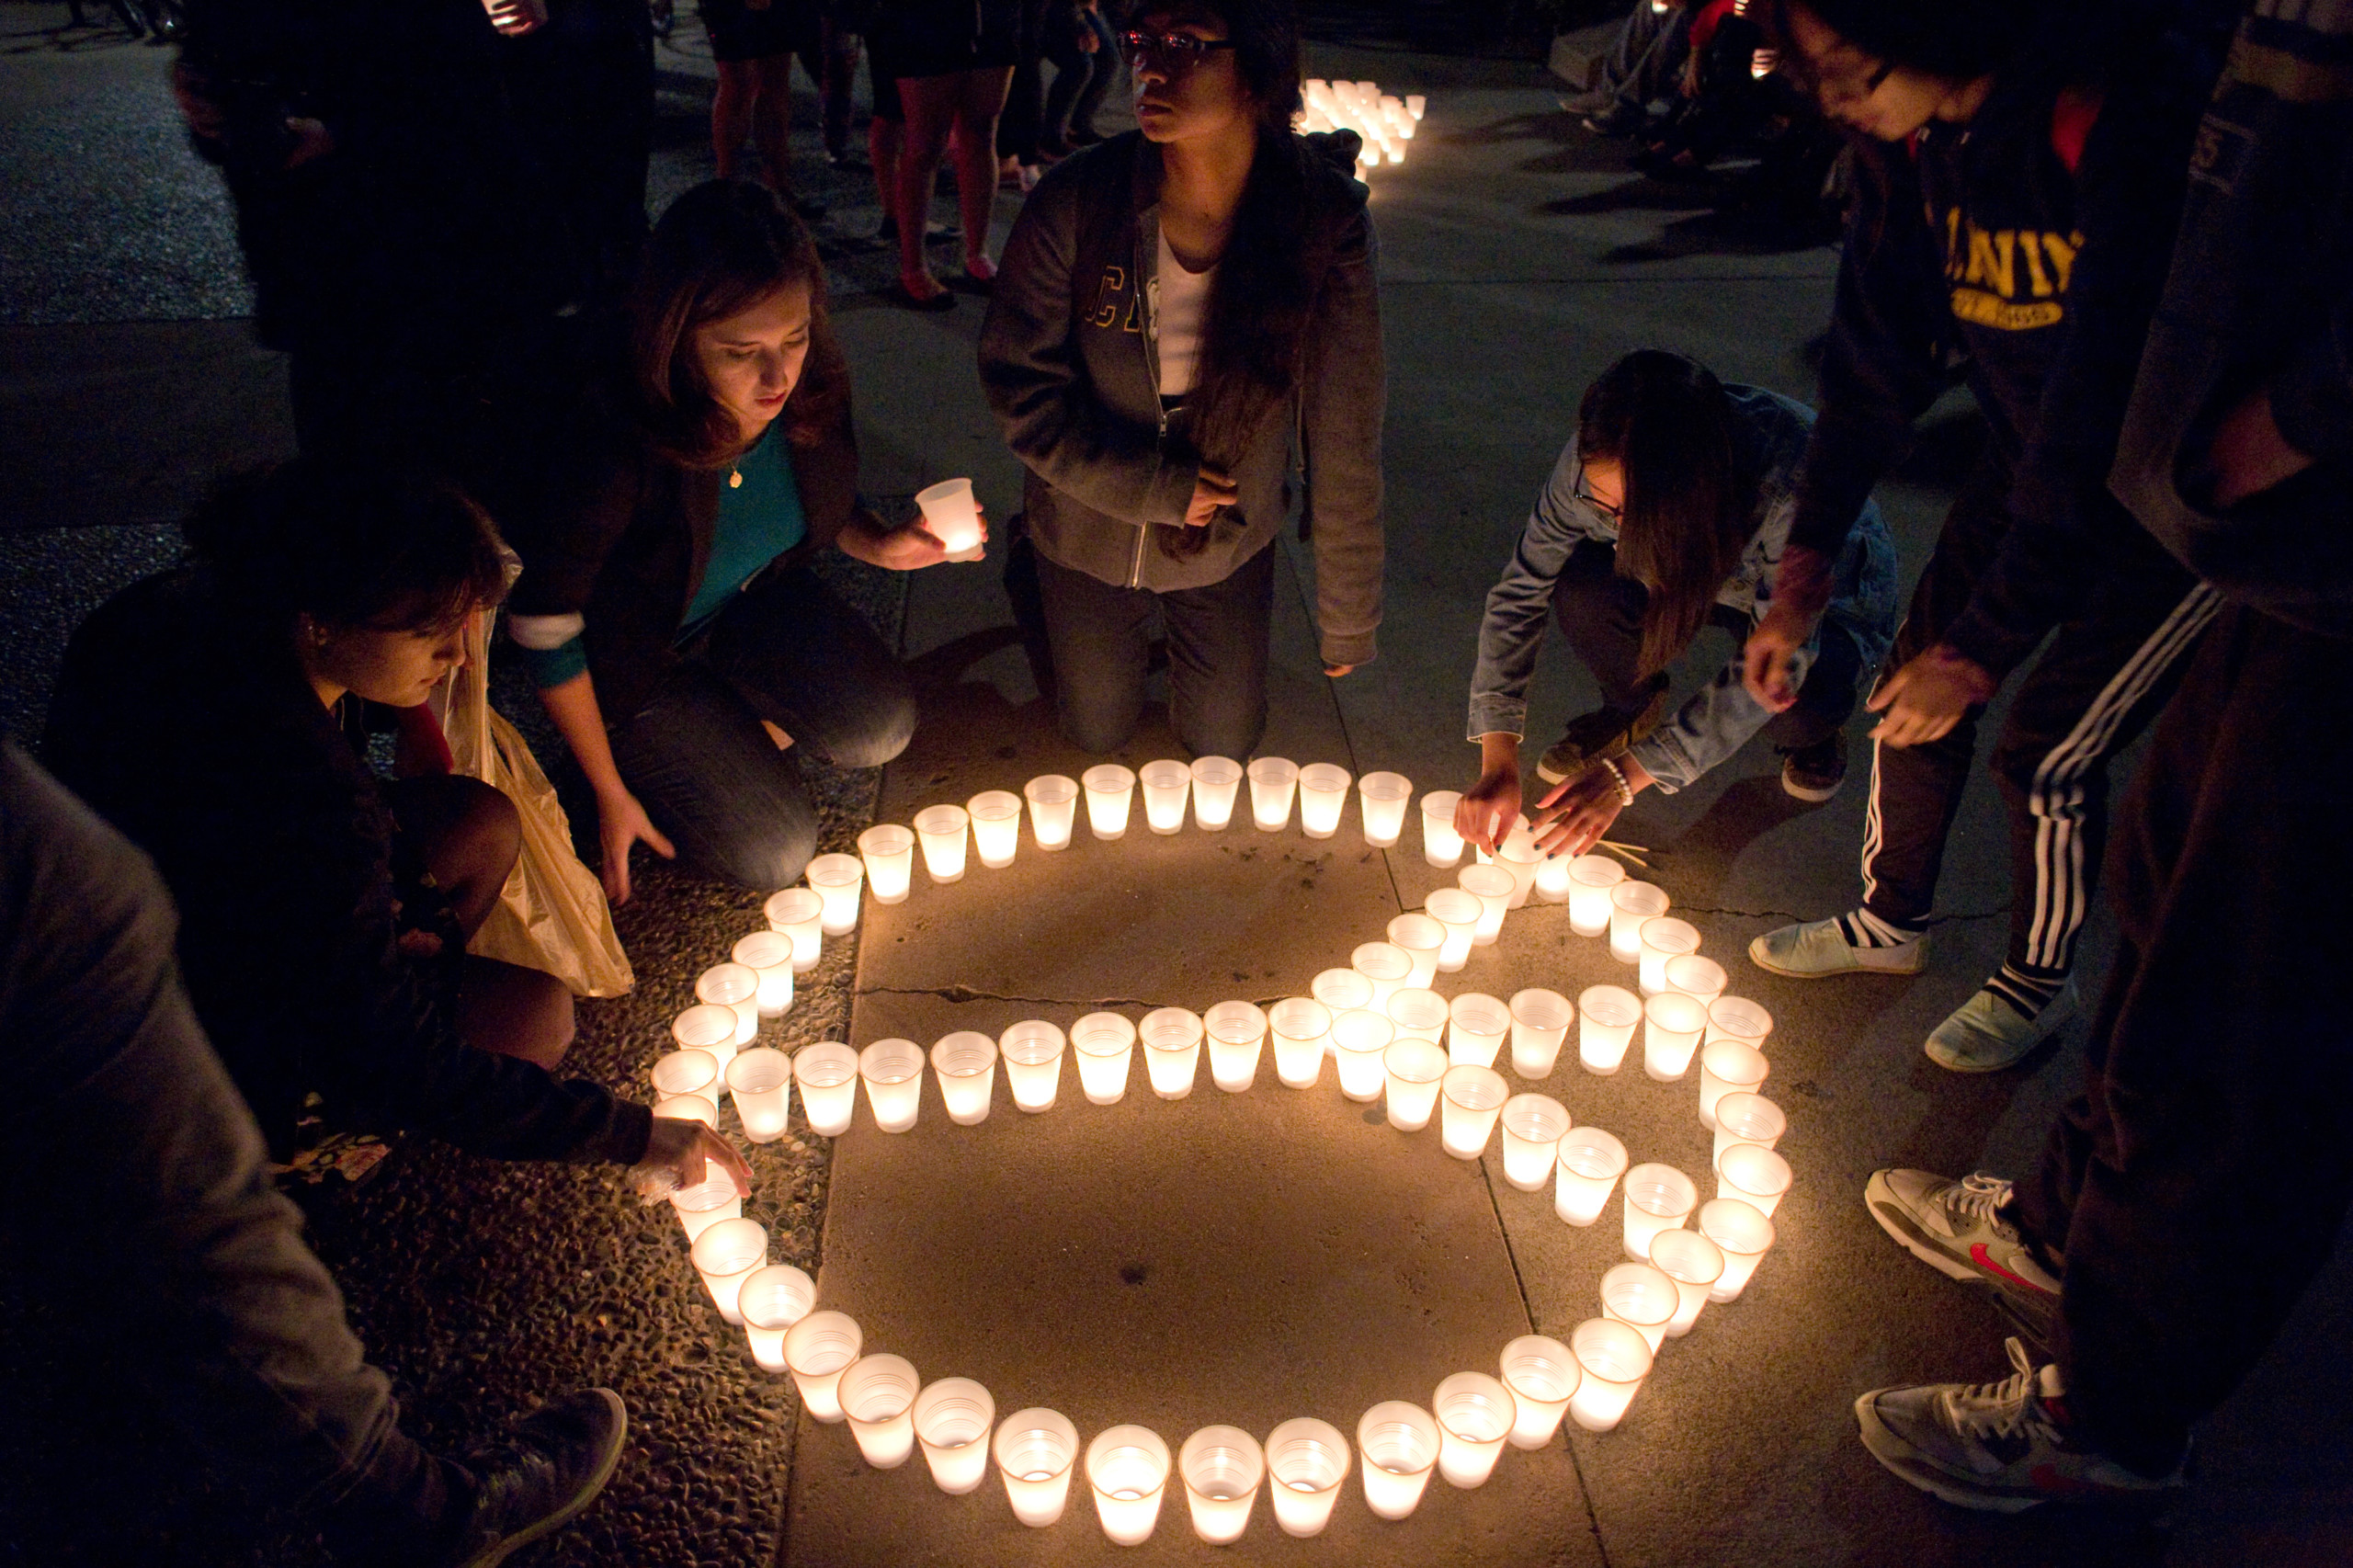 UCI candlelight vigil for victims of the Daesh Terrorist Attacks in Paris, Beirut, and Baghdad